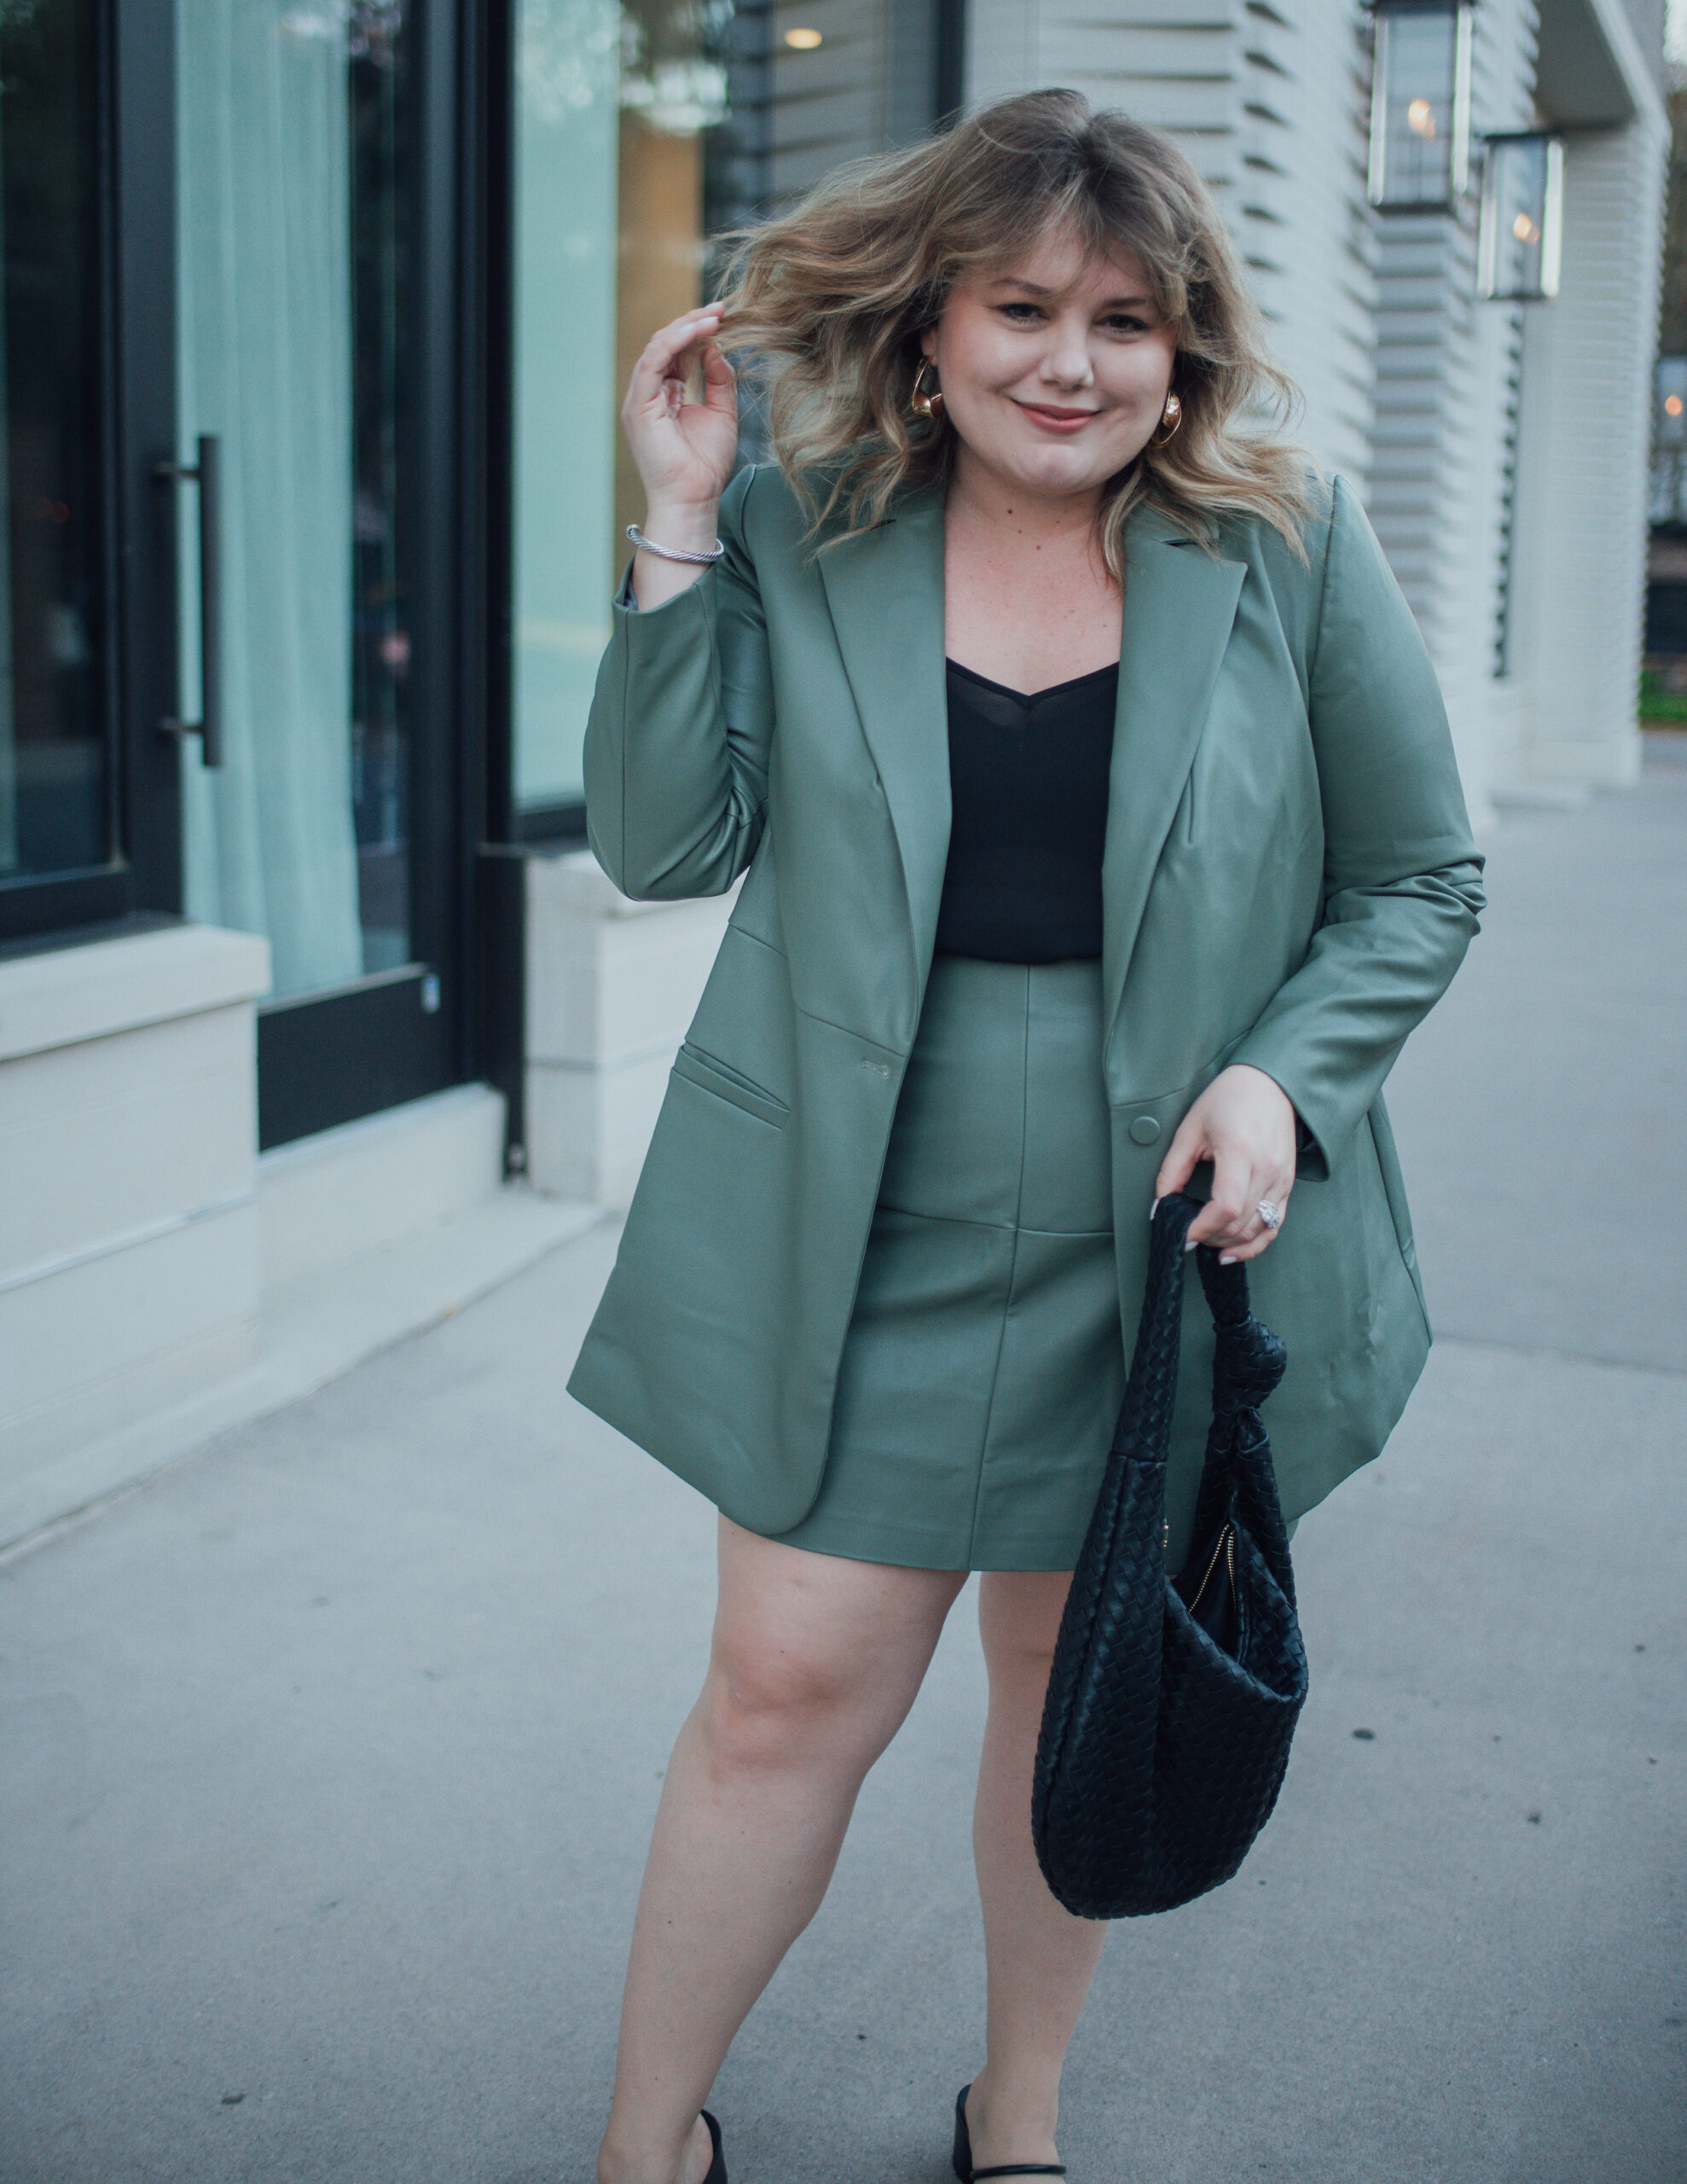 Plus Size Coastal Grandmother Style - Curls and Contours